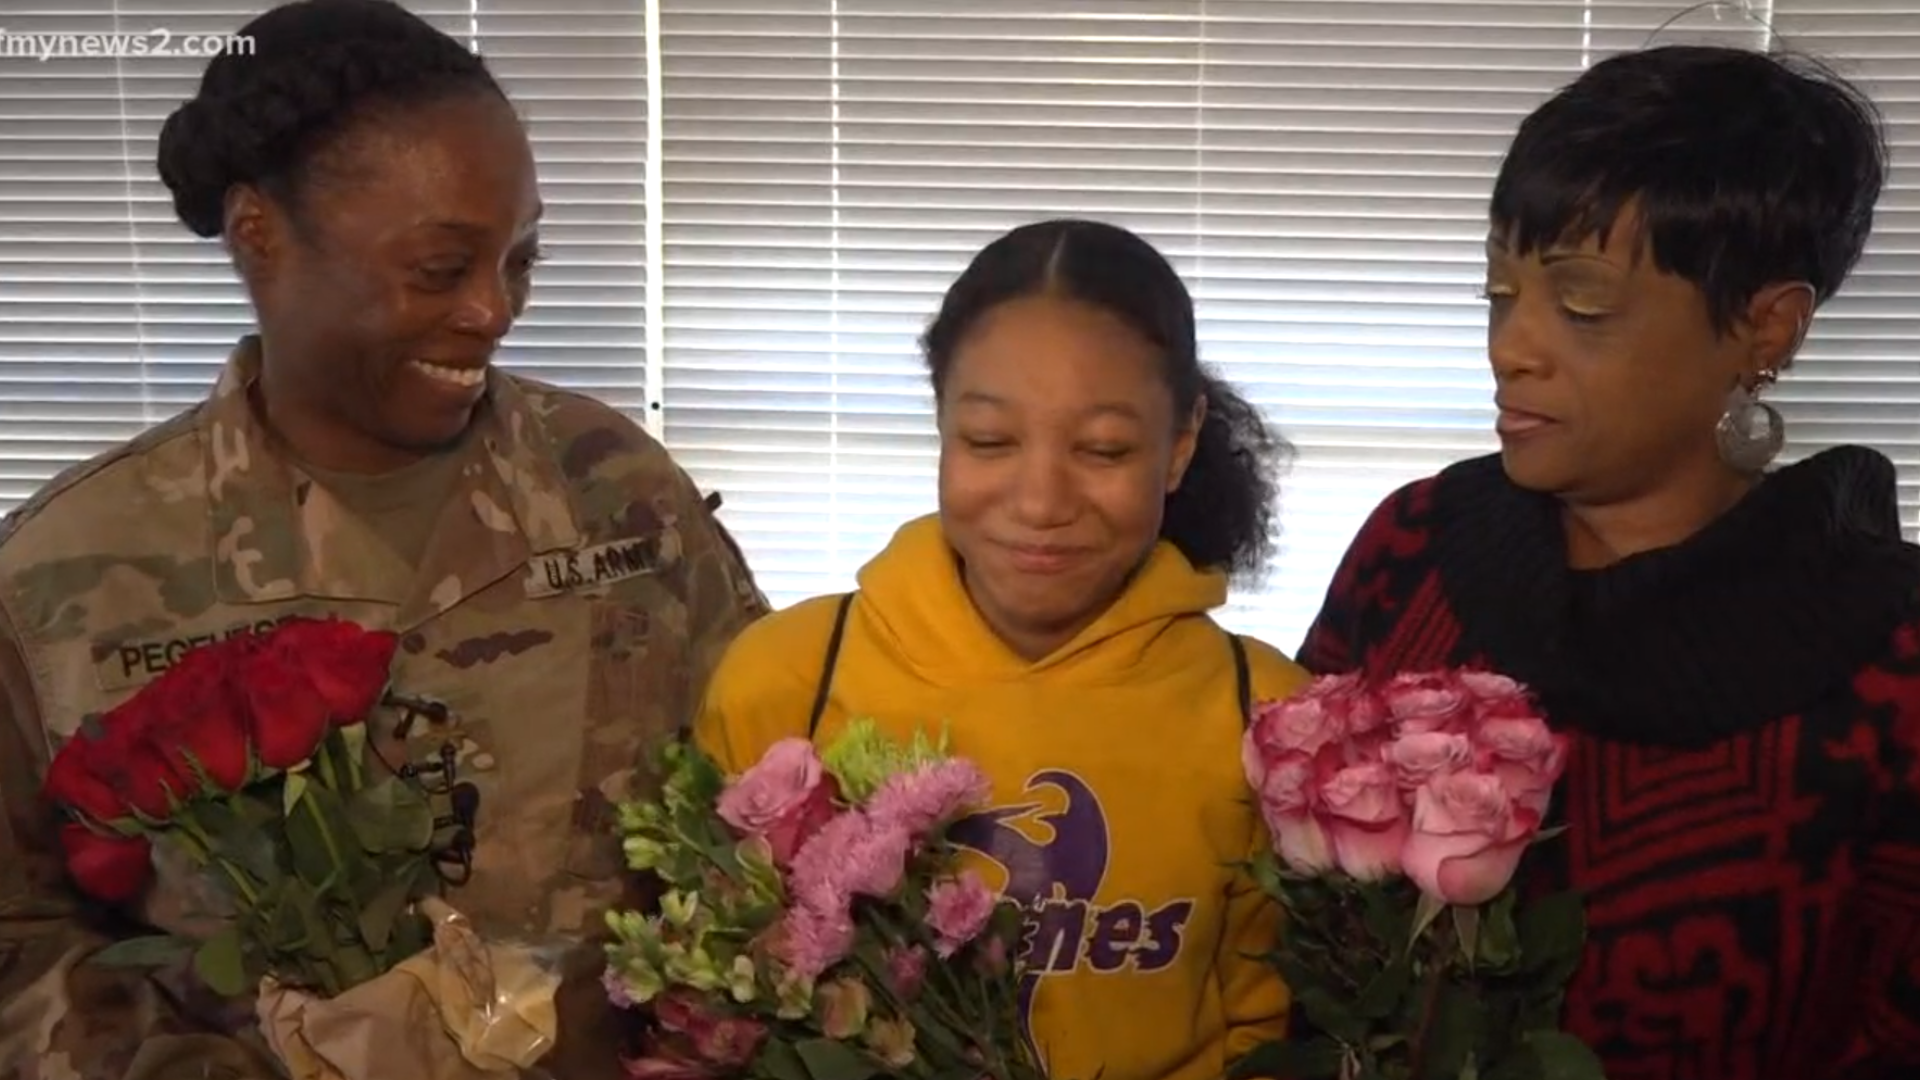 "I wanted to surprise my daughter at school," said Major Pegeuese. "At the same time, I also wanted to surprise my mom." Staff at Hanes Magnet School disguised it as a "Volunteer of the Year" ceremony.